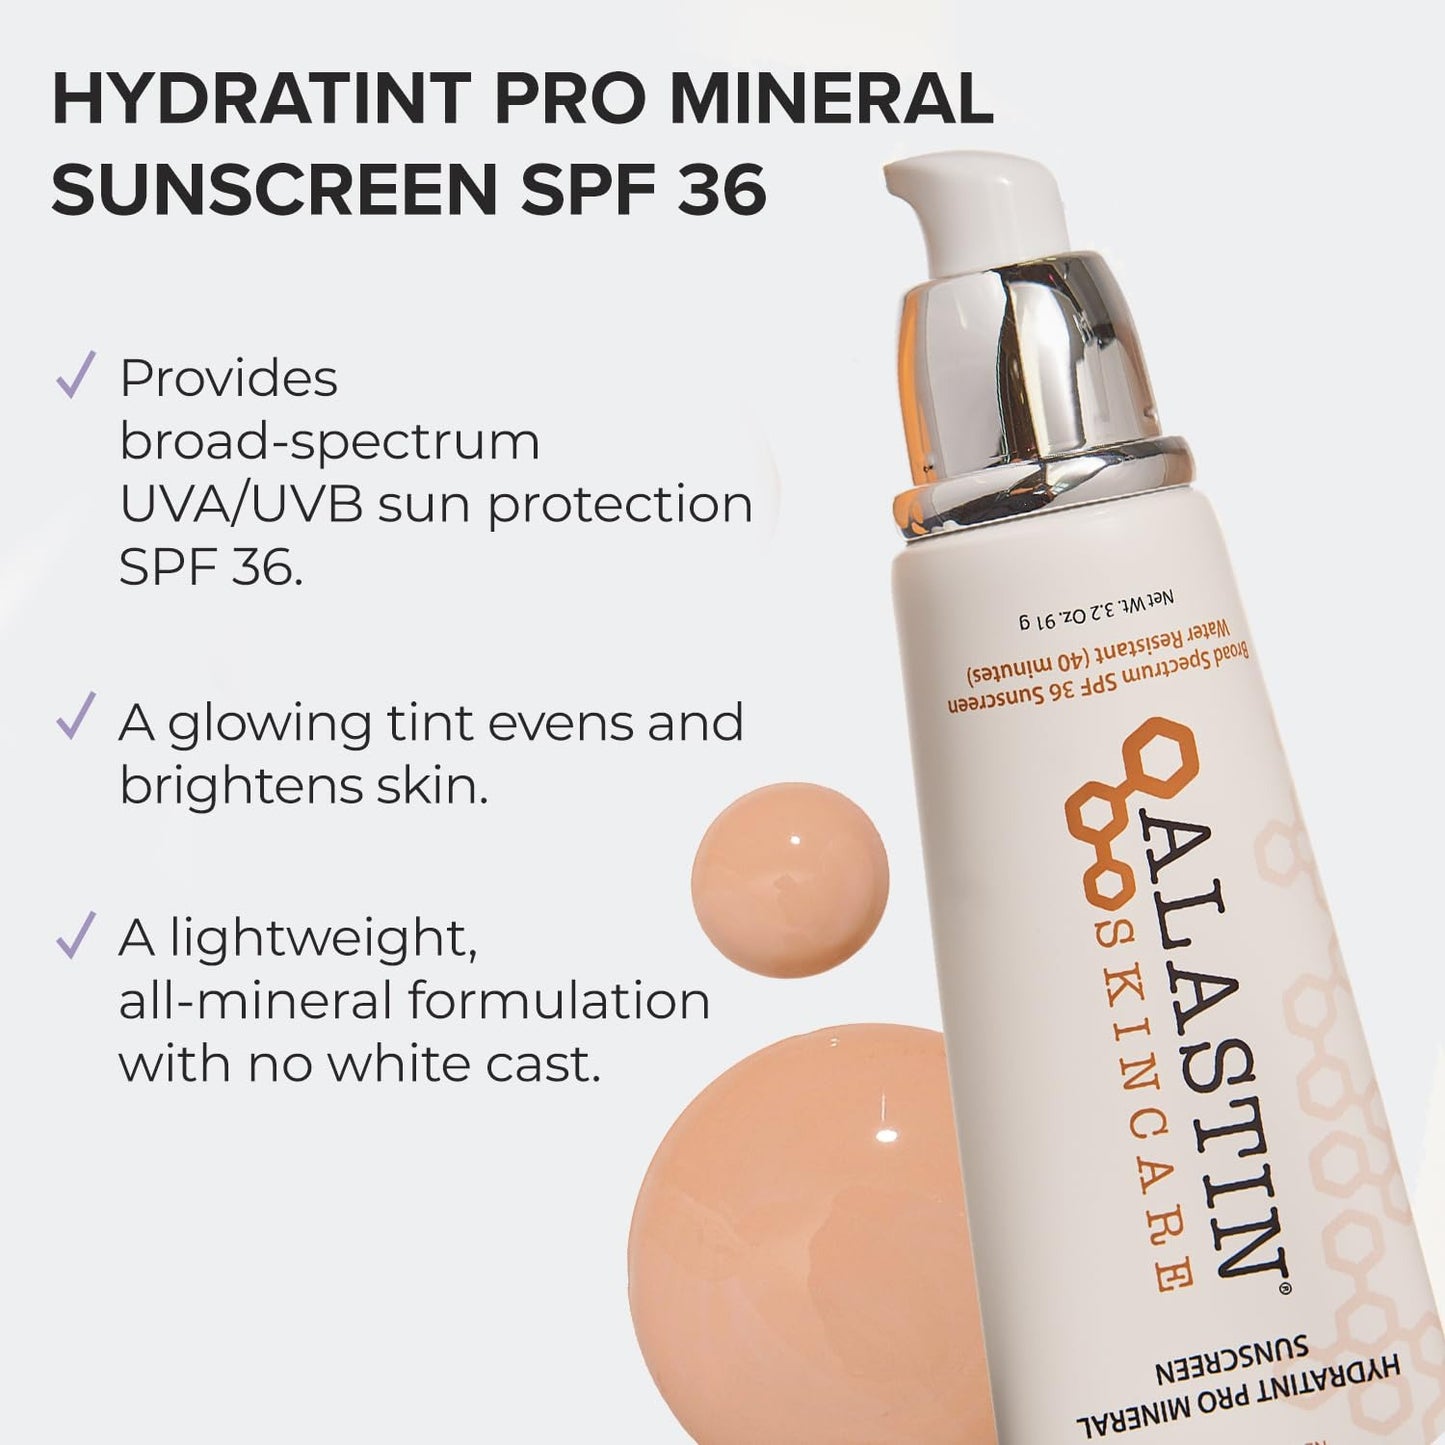 ALASTIN Skincare HydraTint Pro Mineral Sunscreen SPF 36 (3.2 oz) | 2-in-1 Daily Sunblock & Tinted Face Moisturizer | Fragrance-Free, Water